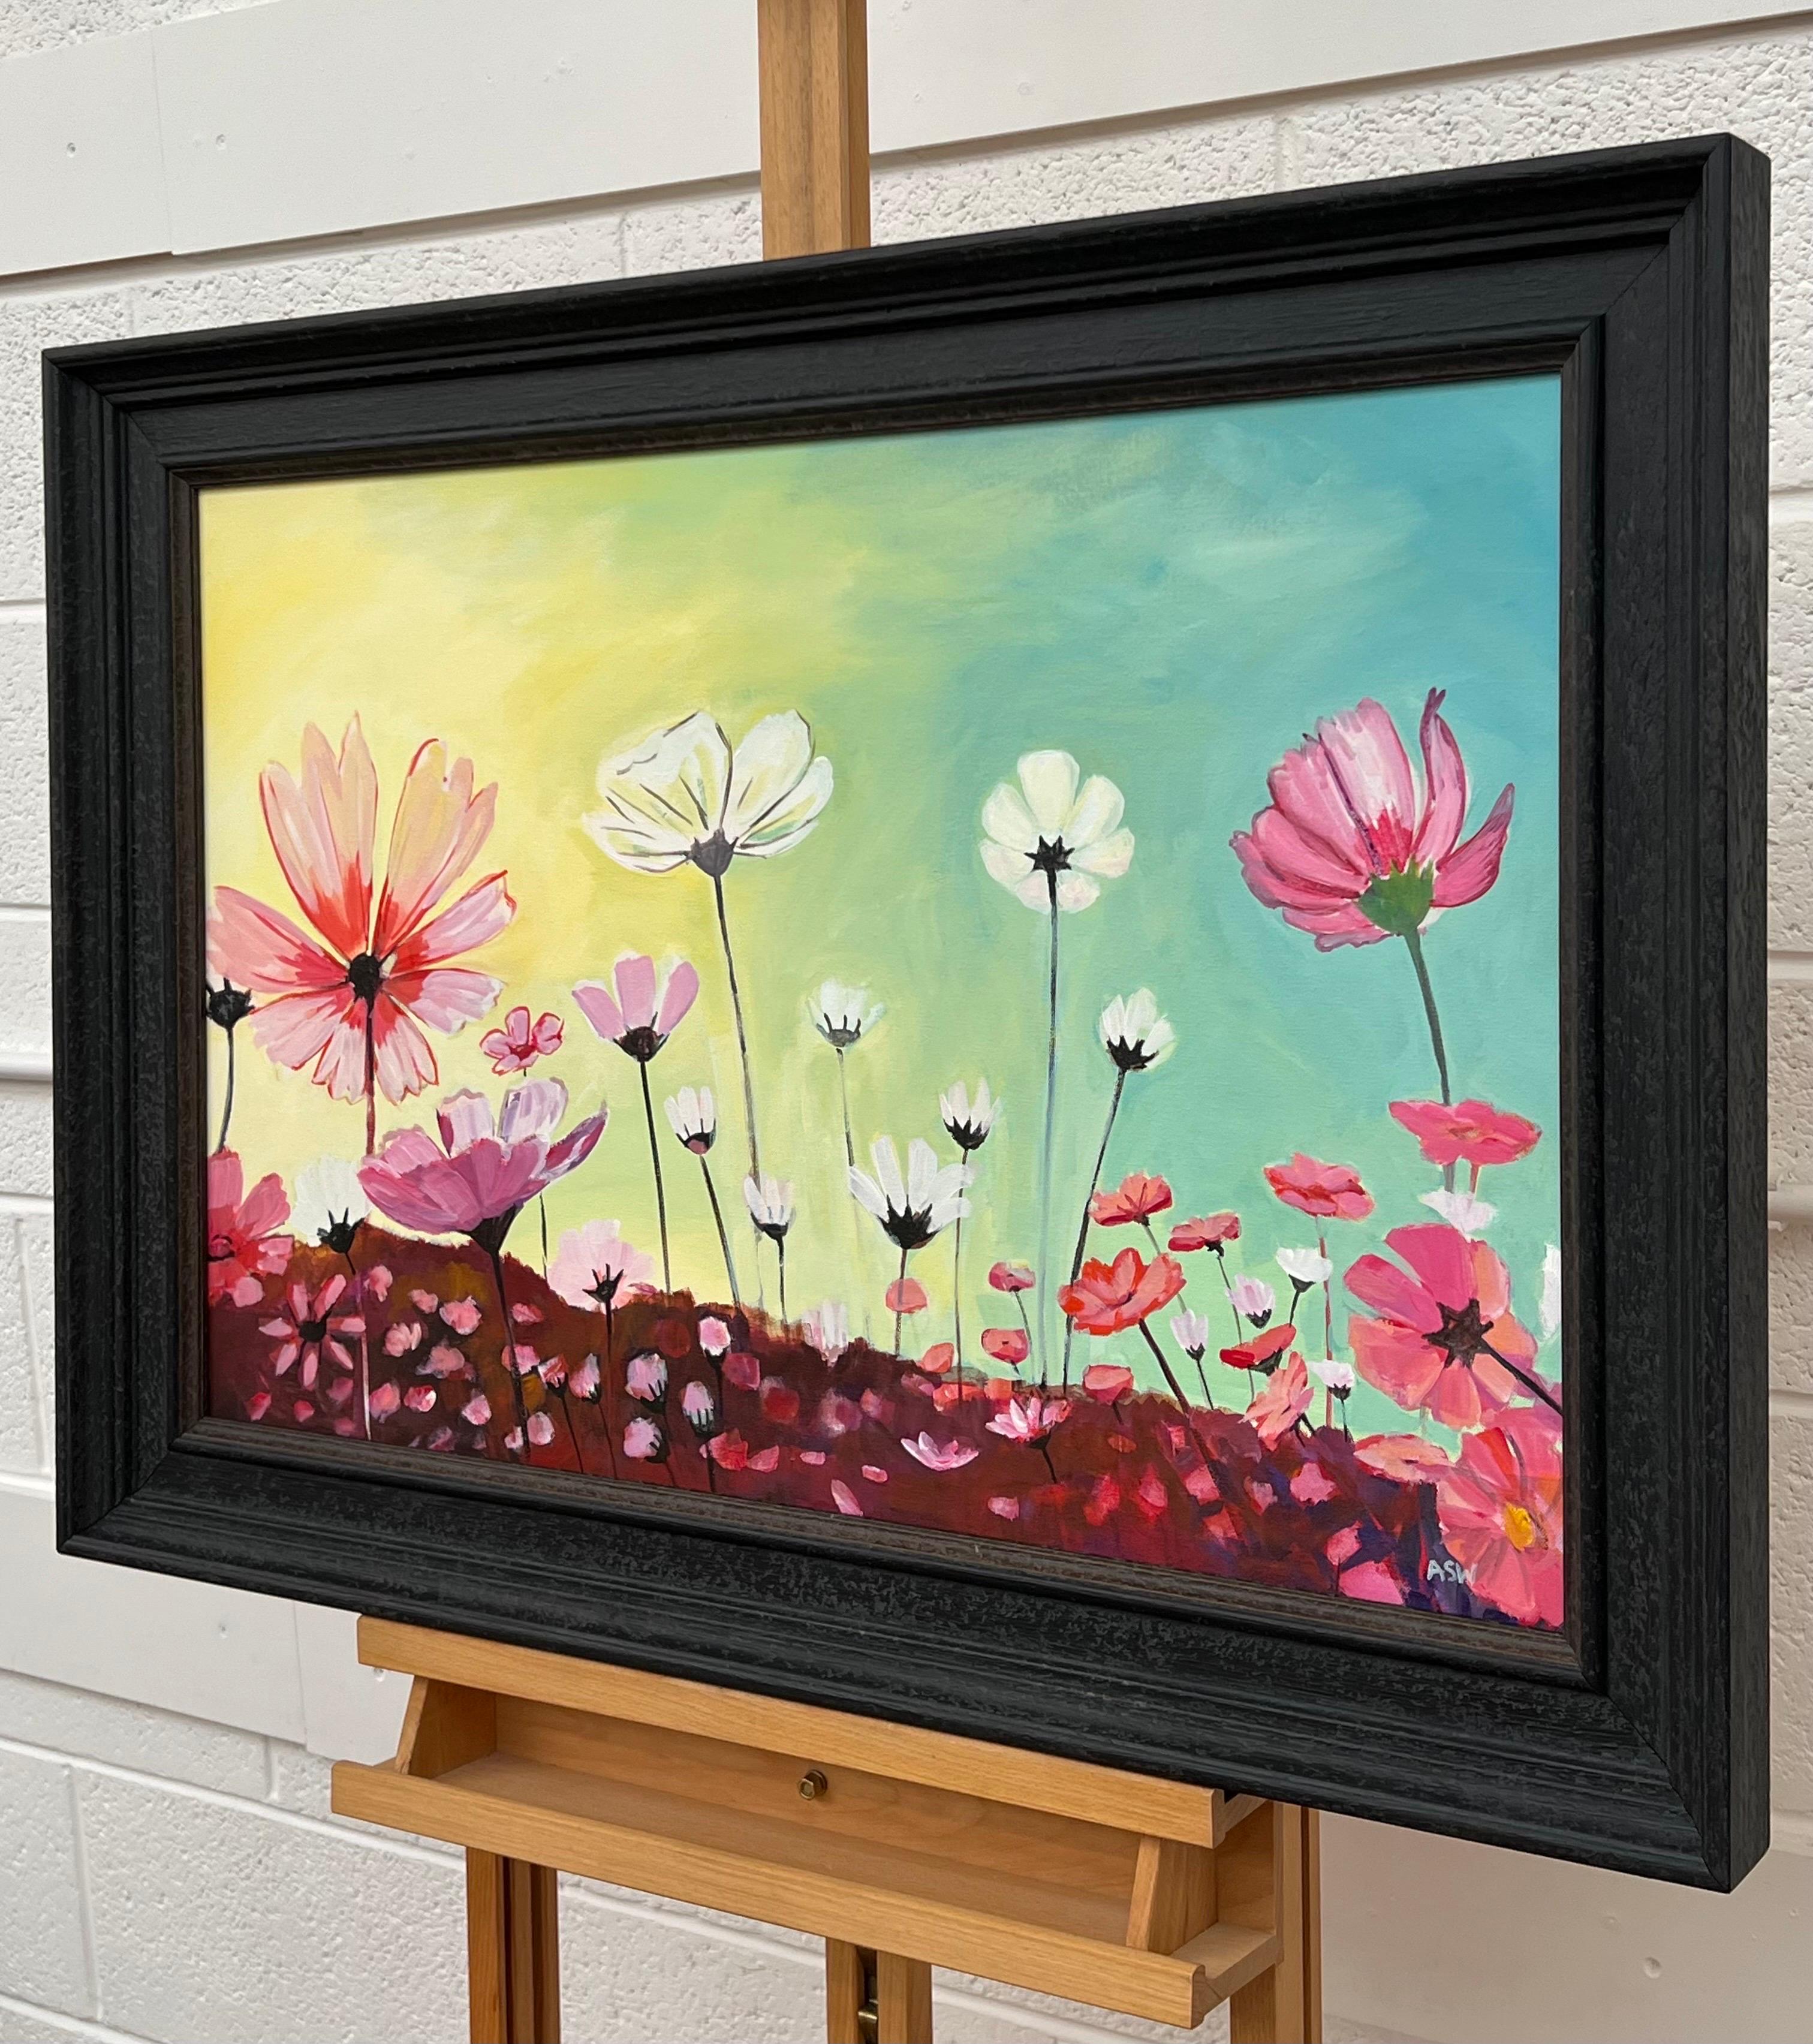 Design Study of Wild Pink & White Flowers on a Yellow & Turquoise Background, by Contemporary British Artist. 

Art measures 30 x 20 inches
Frame measures 35 x 25 inches

Angela Wakefield has twice been on the front cover of ‘Art of England’ and